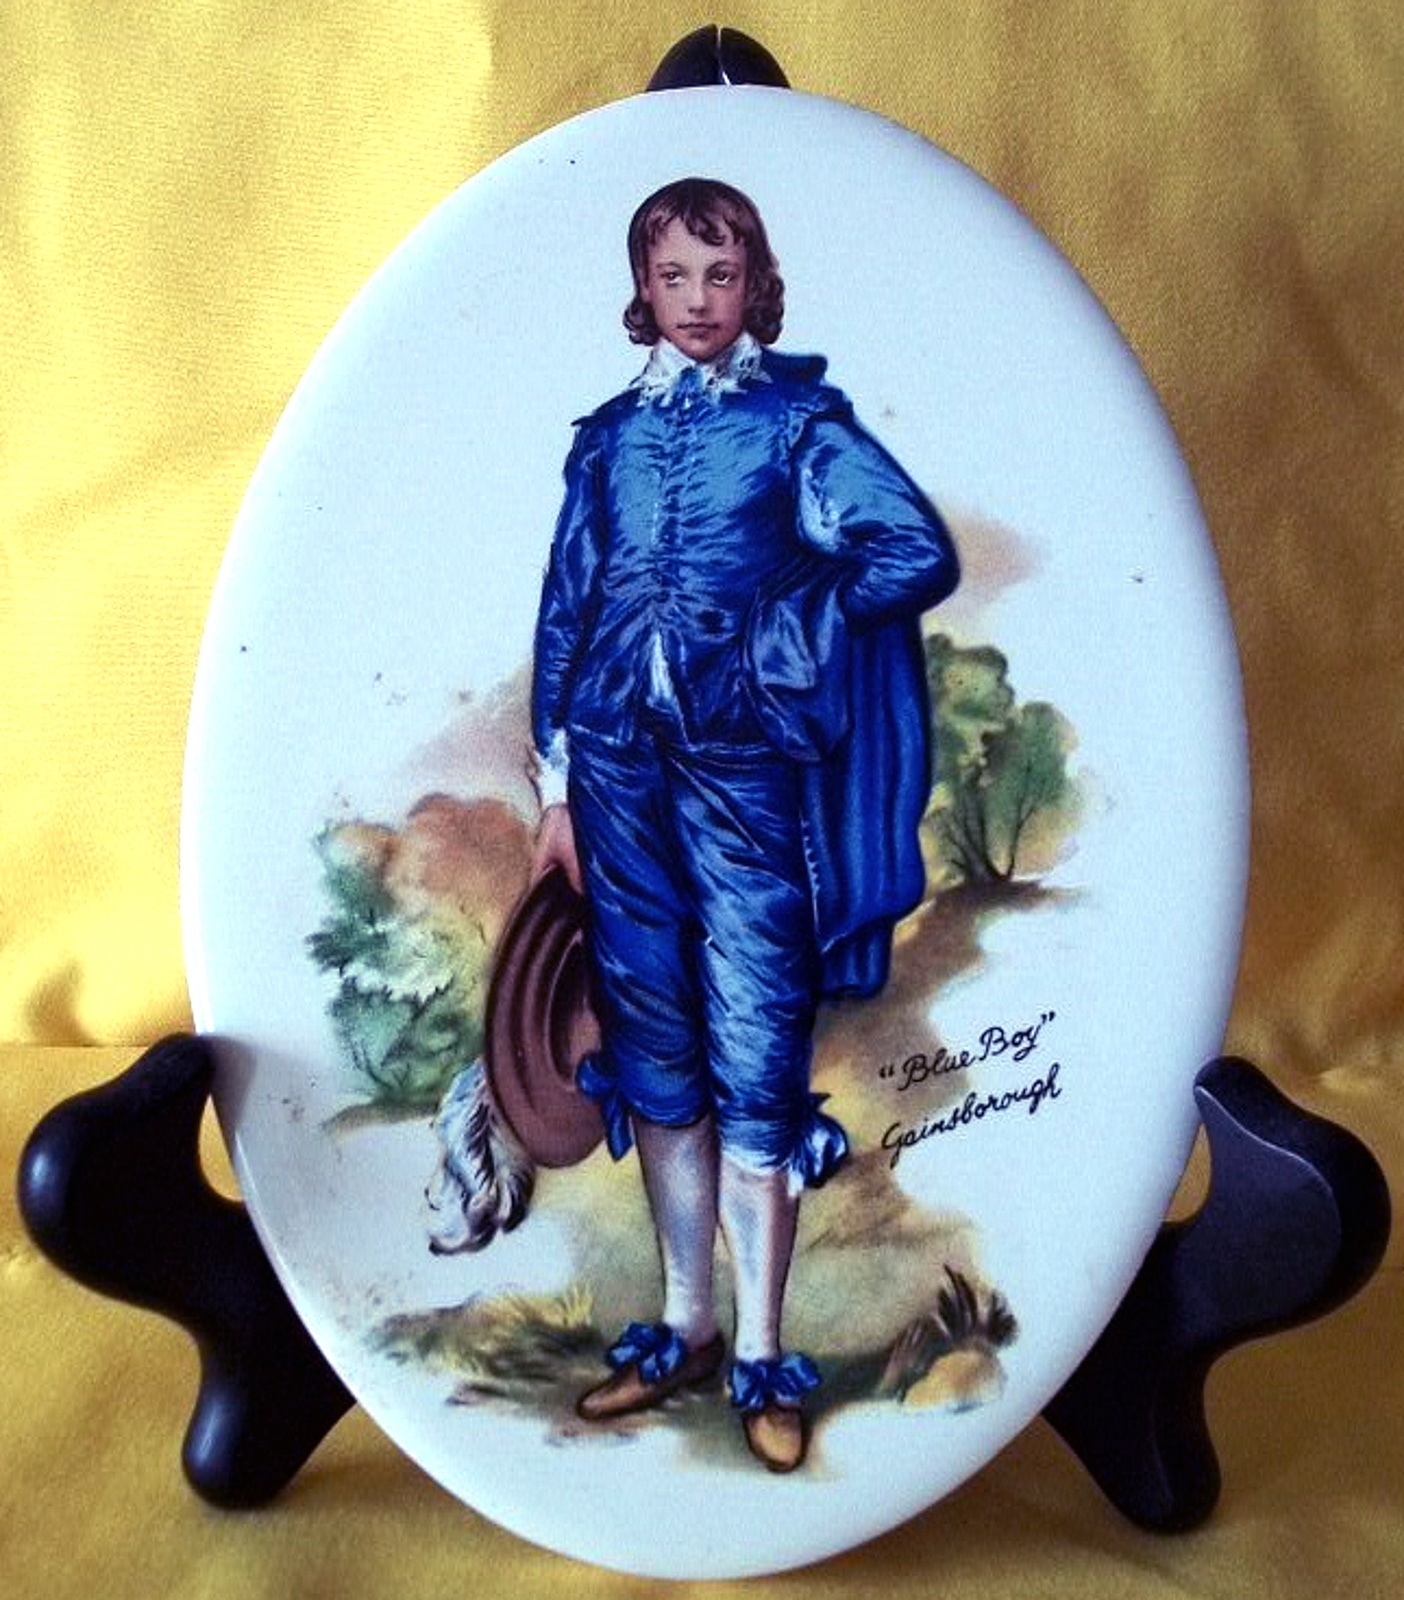 Primary image for BLUE BOY ~ H&R Johnson, Thomas Gainsborough, 6"x4" Oval Tile circa 1970s ~ PLATE